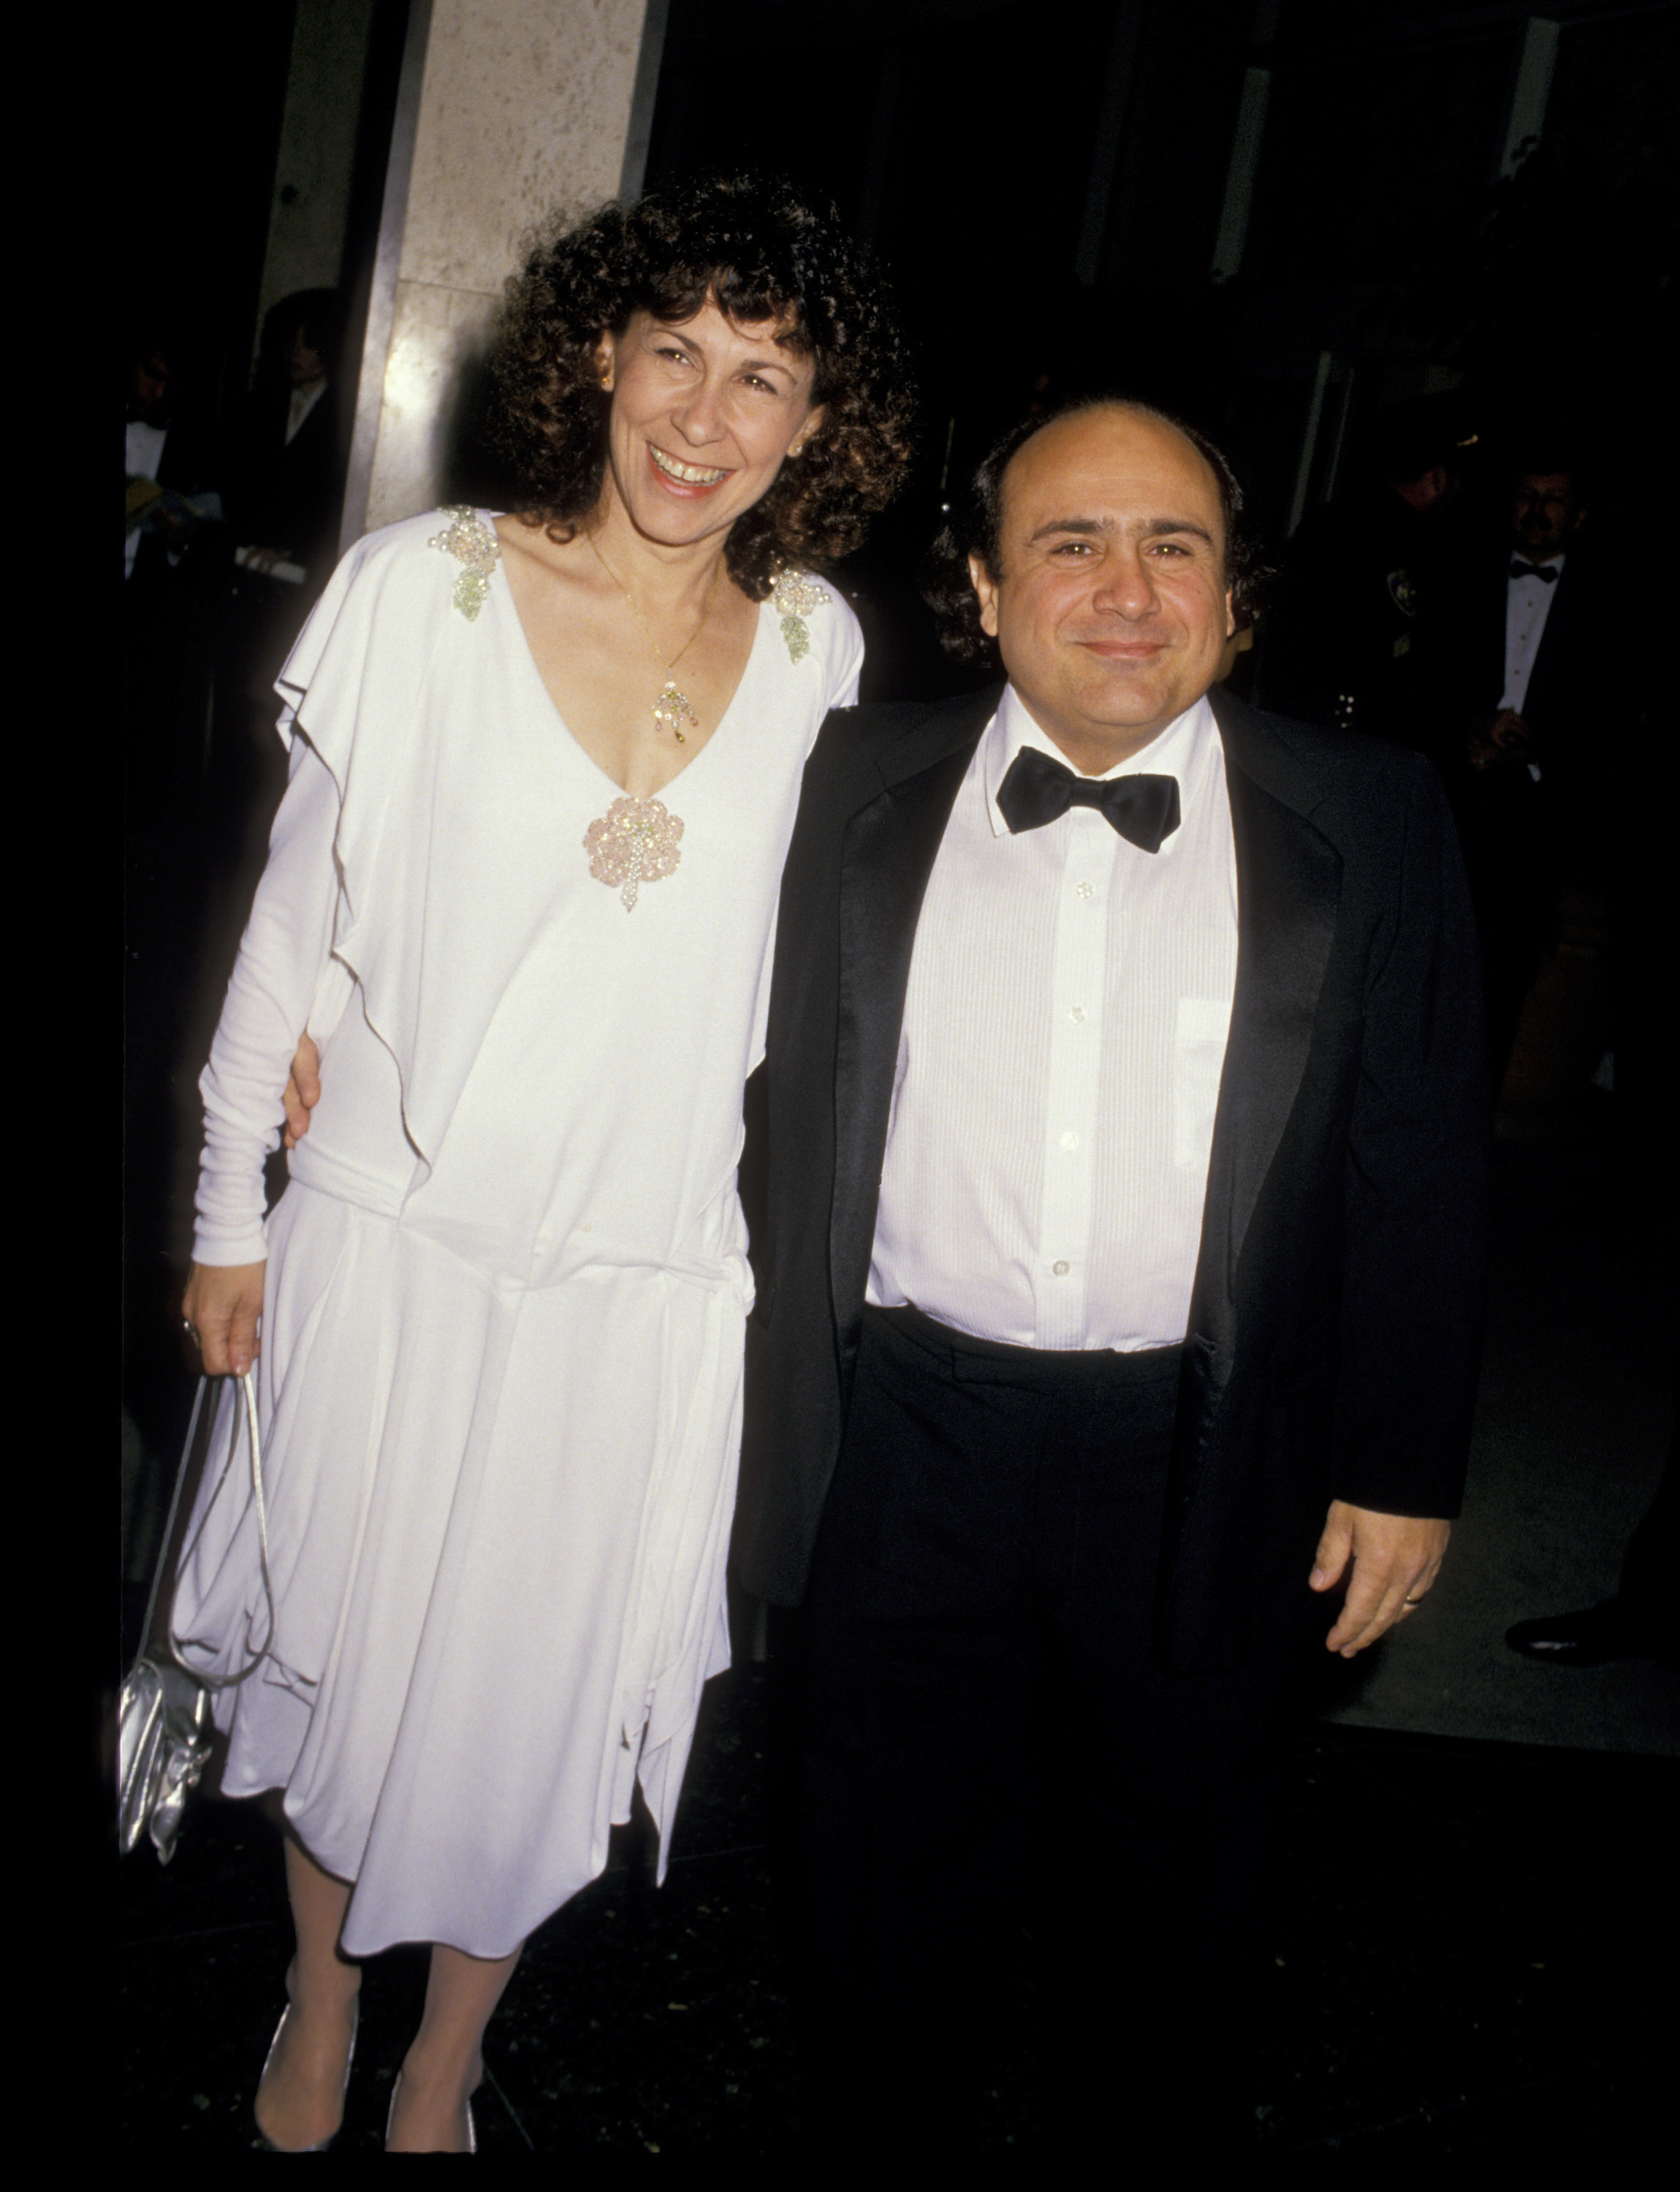 Rhea Perlman and Danny DeVito at the 45th Annual Golden Globe Awards at the Beverly Hilton on January 23, 1988 | Source: Getty Images